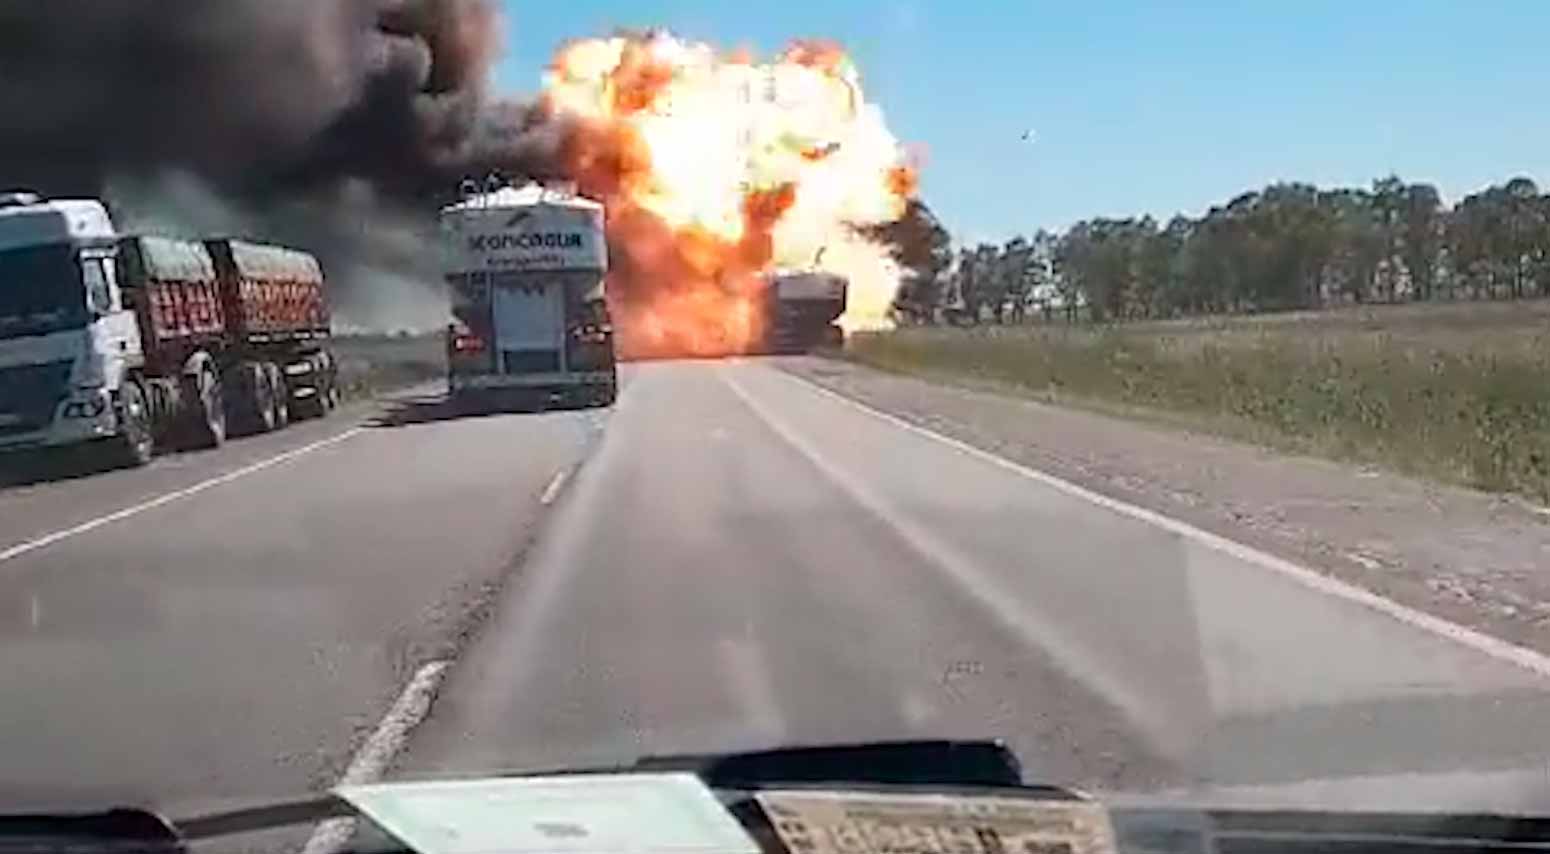 Video shows the moment a truck explodes on a highway in Argentina. Photo and video: Reproduction Twitter @enlamiraradio 